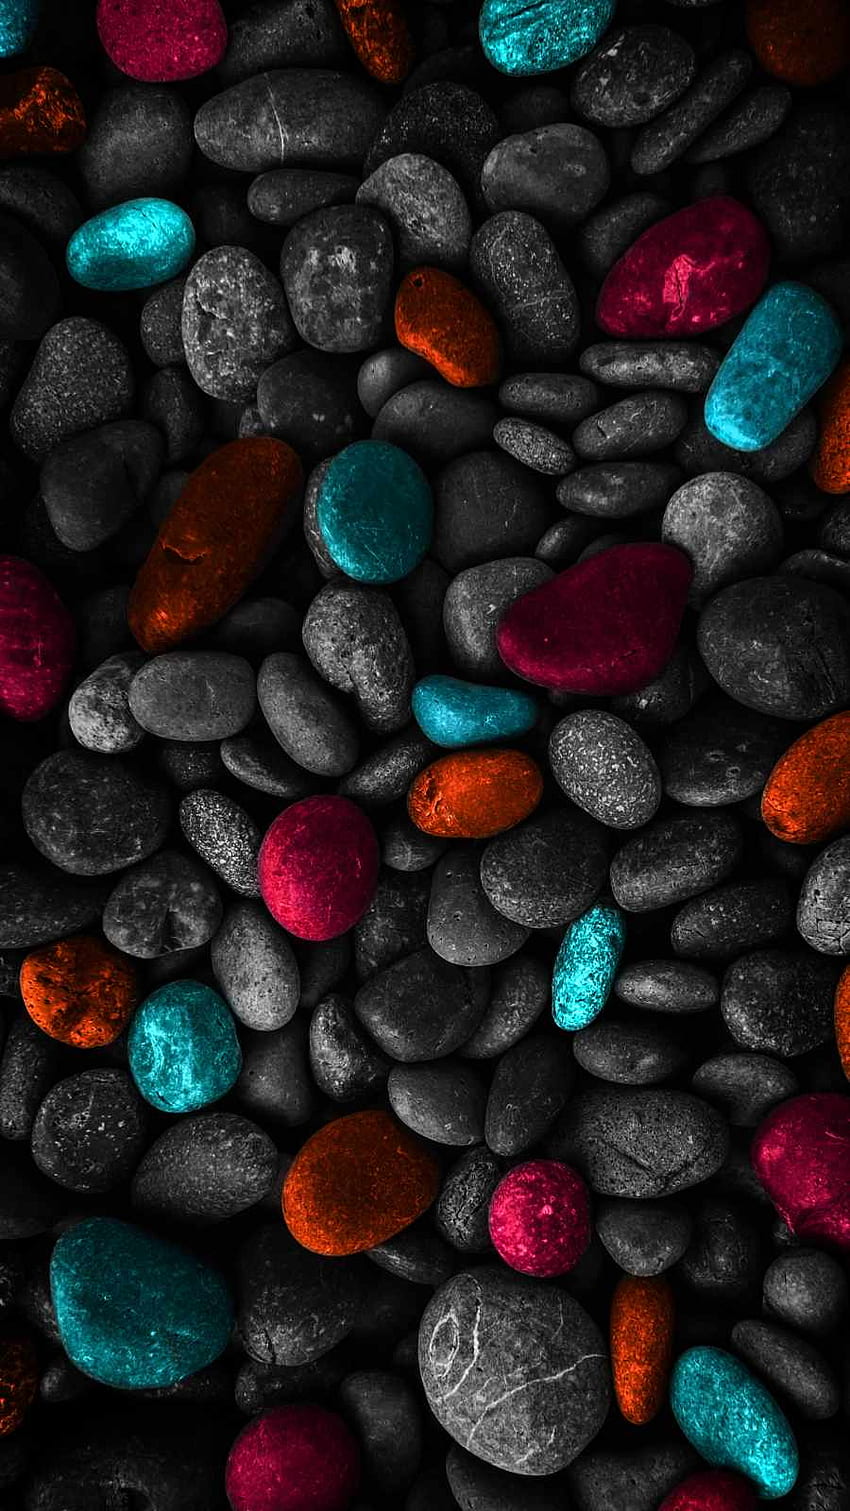 Colorful Pebbles Stones - IPhone : iPhone , Colorful Stones HD phone wallpaper